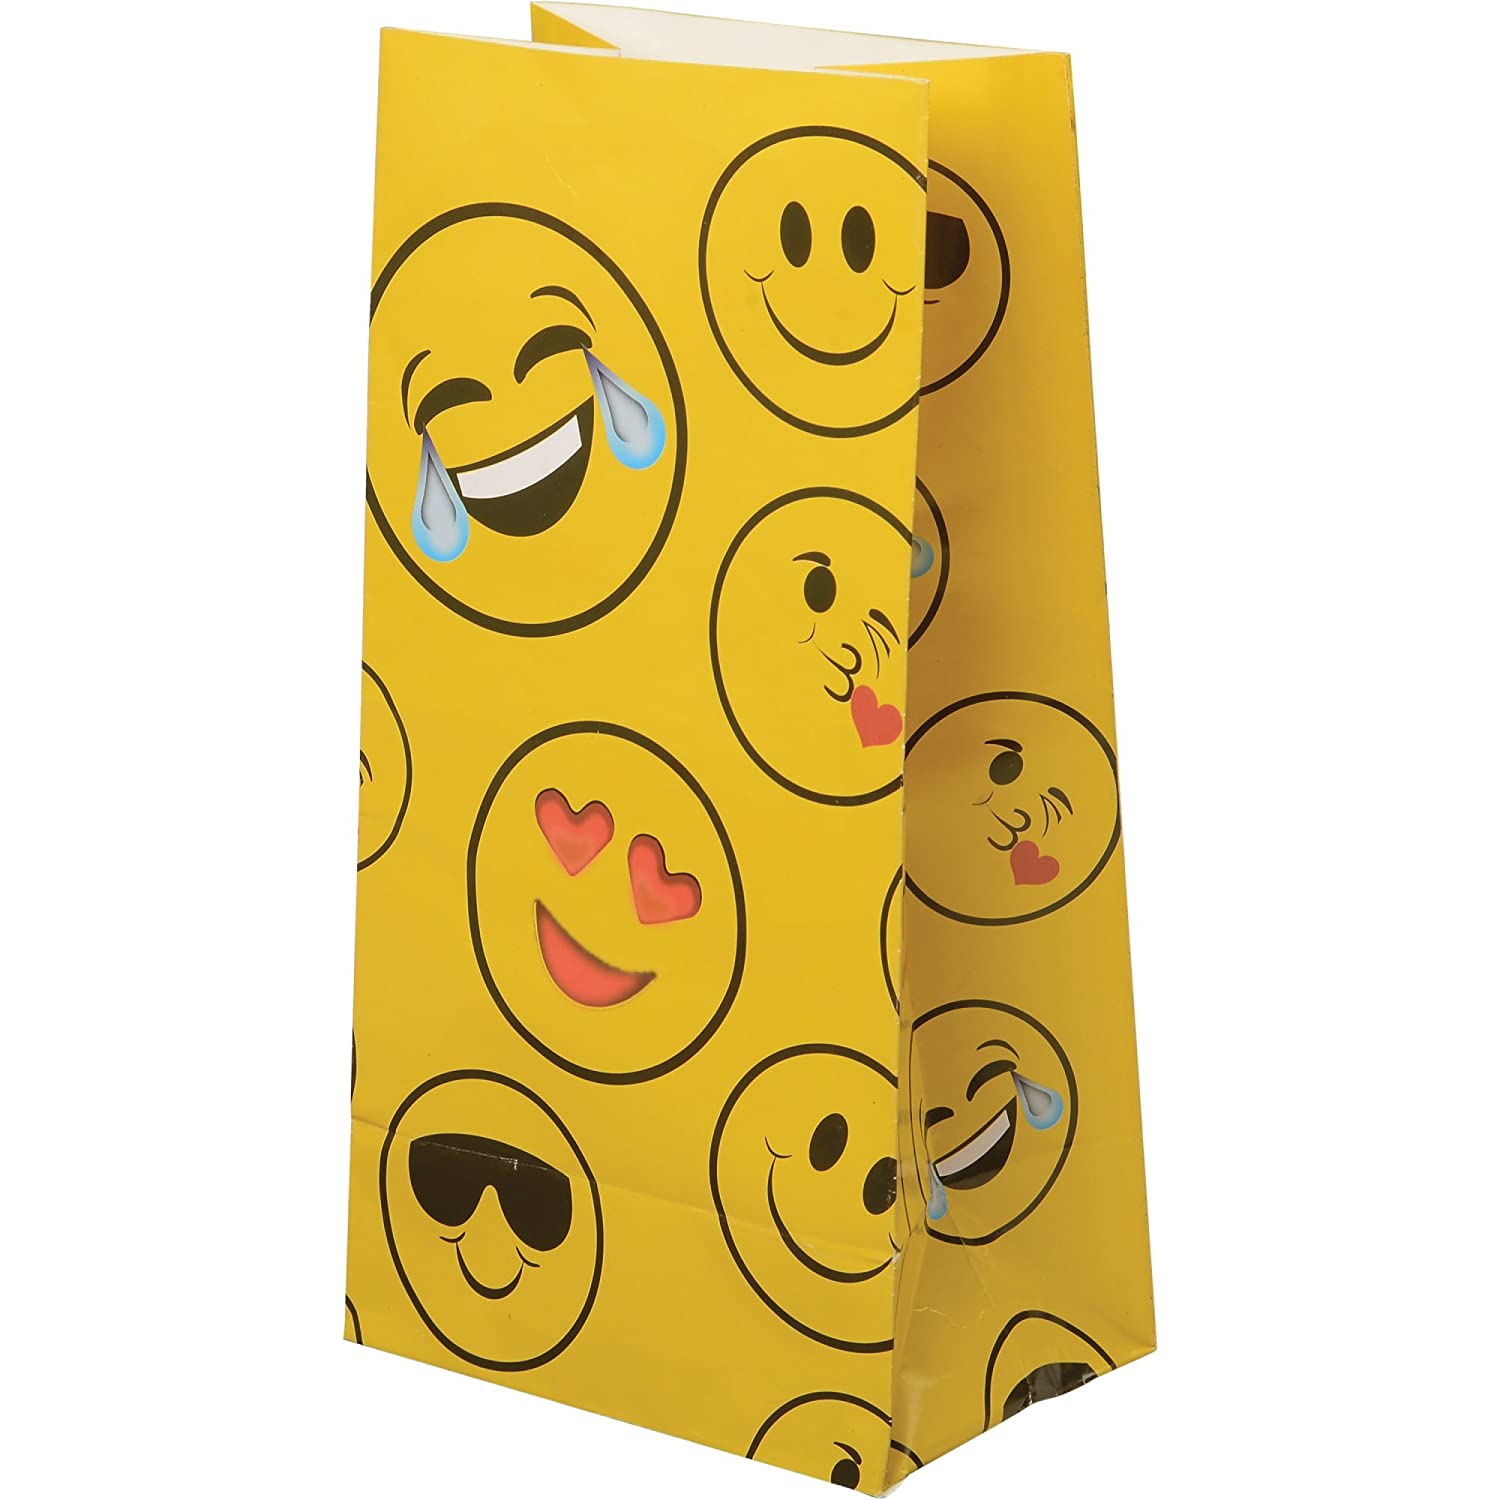 ''Marvel Trading Company, Inc. US TOY Yellow Assorted Emoji Emoticon Paper Party Bags - Set of 12''